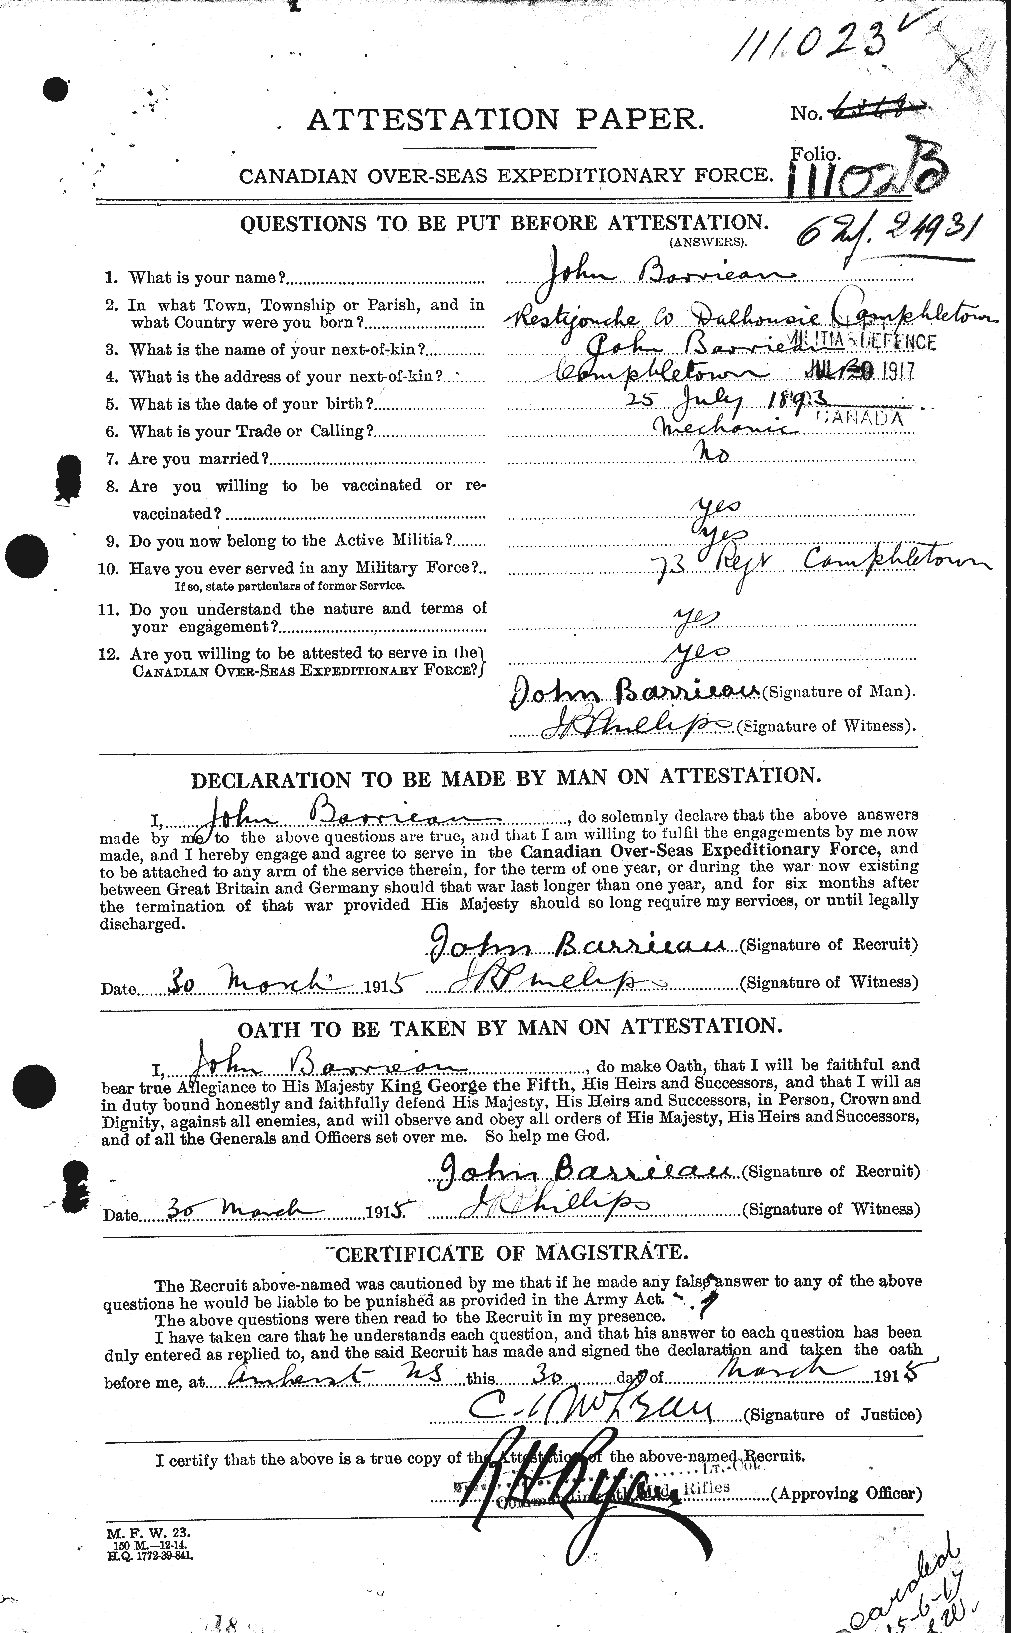 Personnel Records of the First World War - CEF 220009a